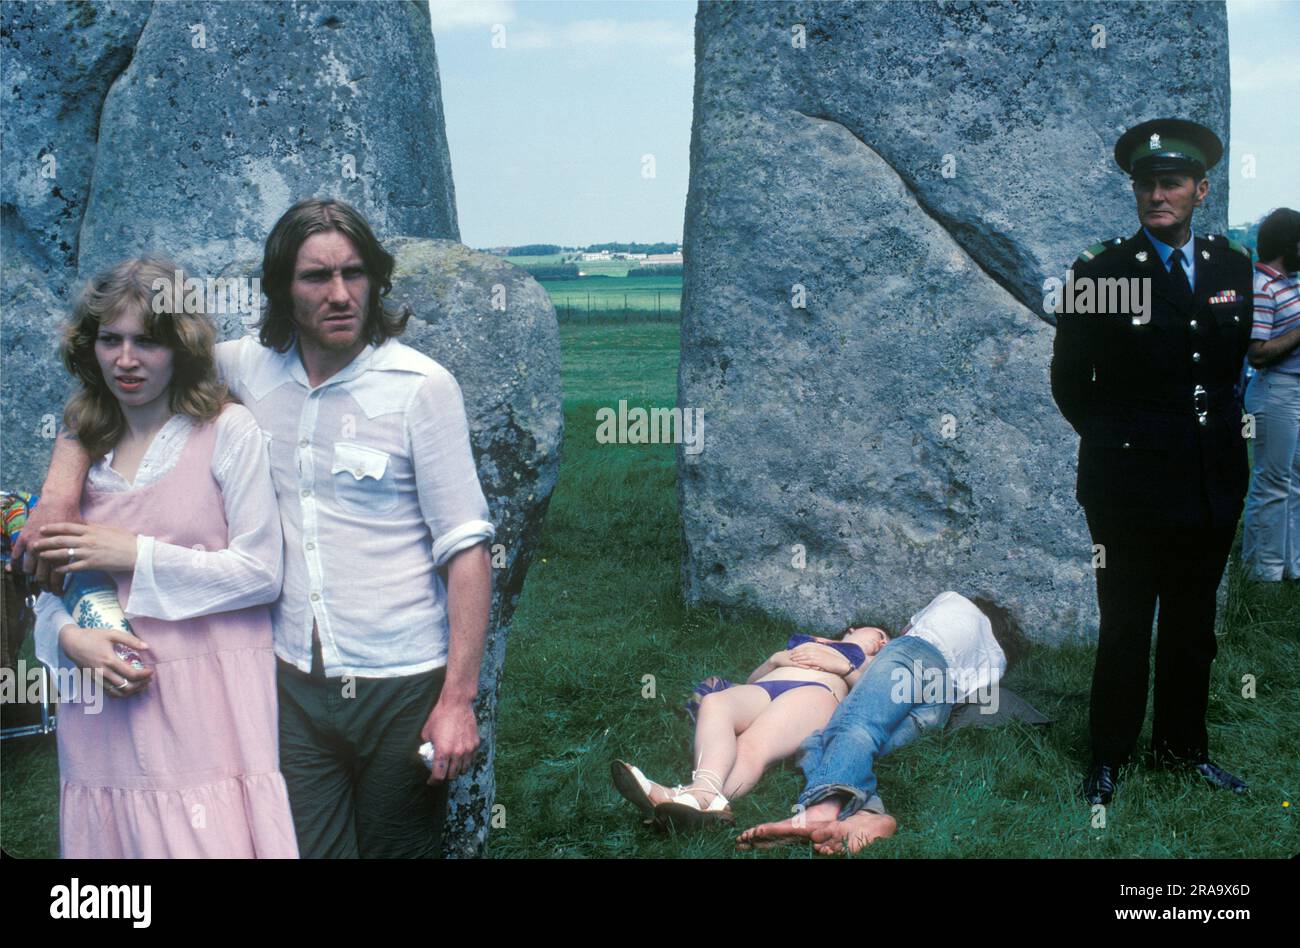 Stonehenge Free Festival at the summer solstice, Wiltshire, England June 21st 1979. Besides the hippies a small group of English tourists watched as others lay in the sun and a 'guard' stood by watching. 1970s UK HOMER SYKES Stock Photo